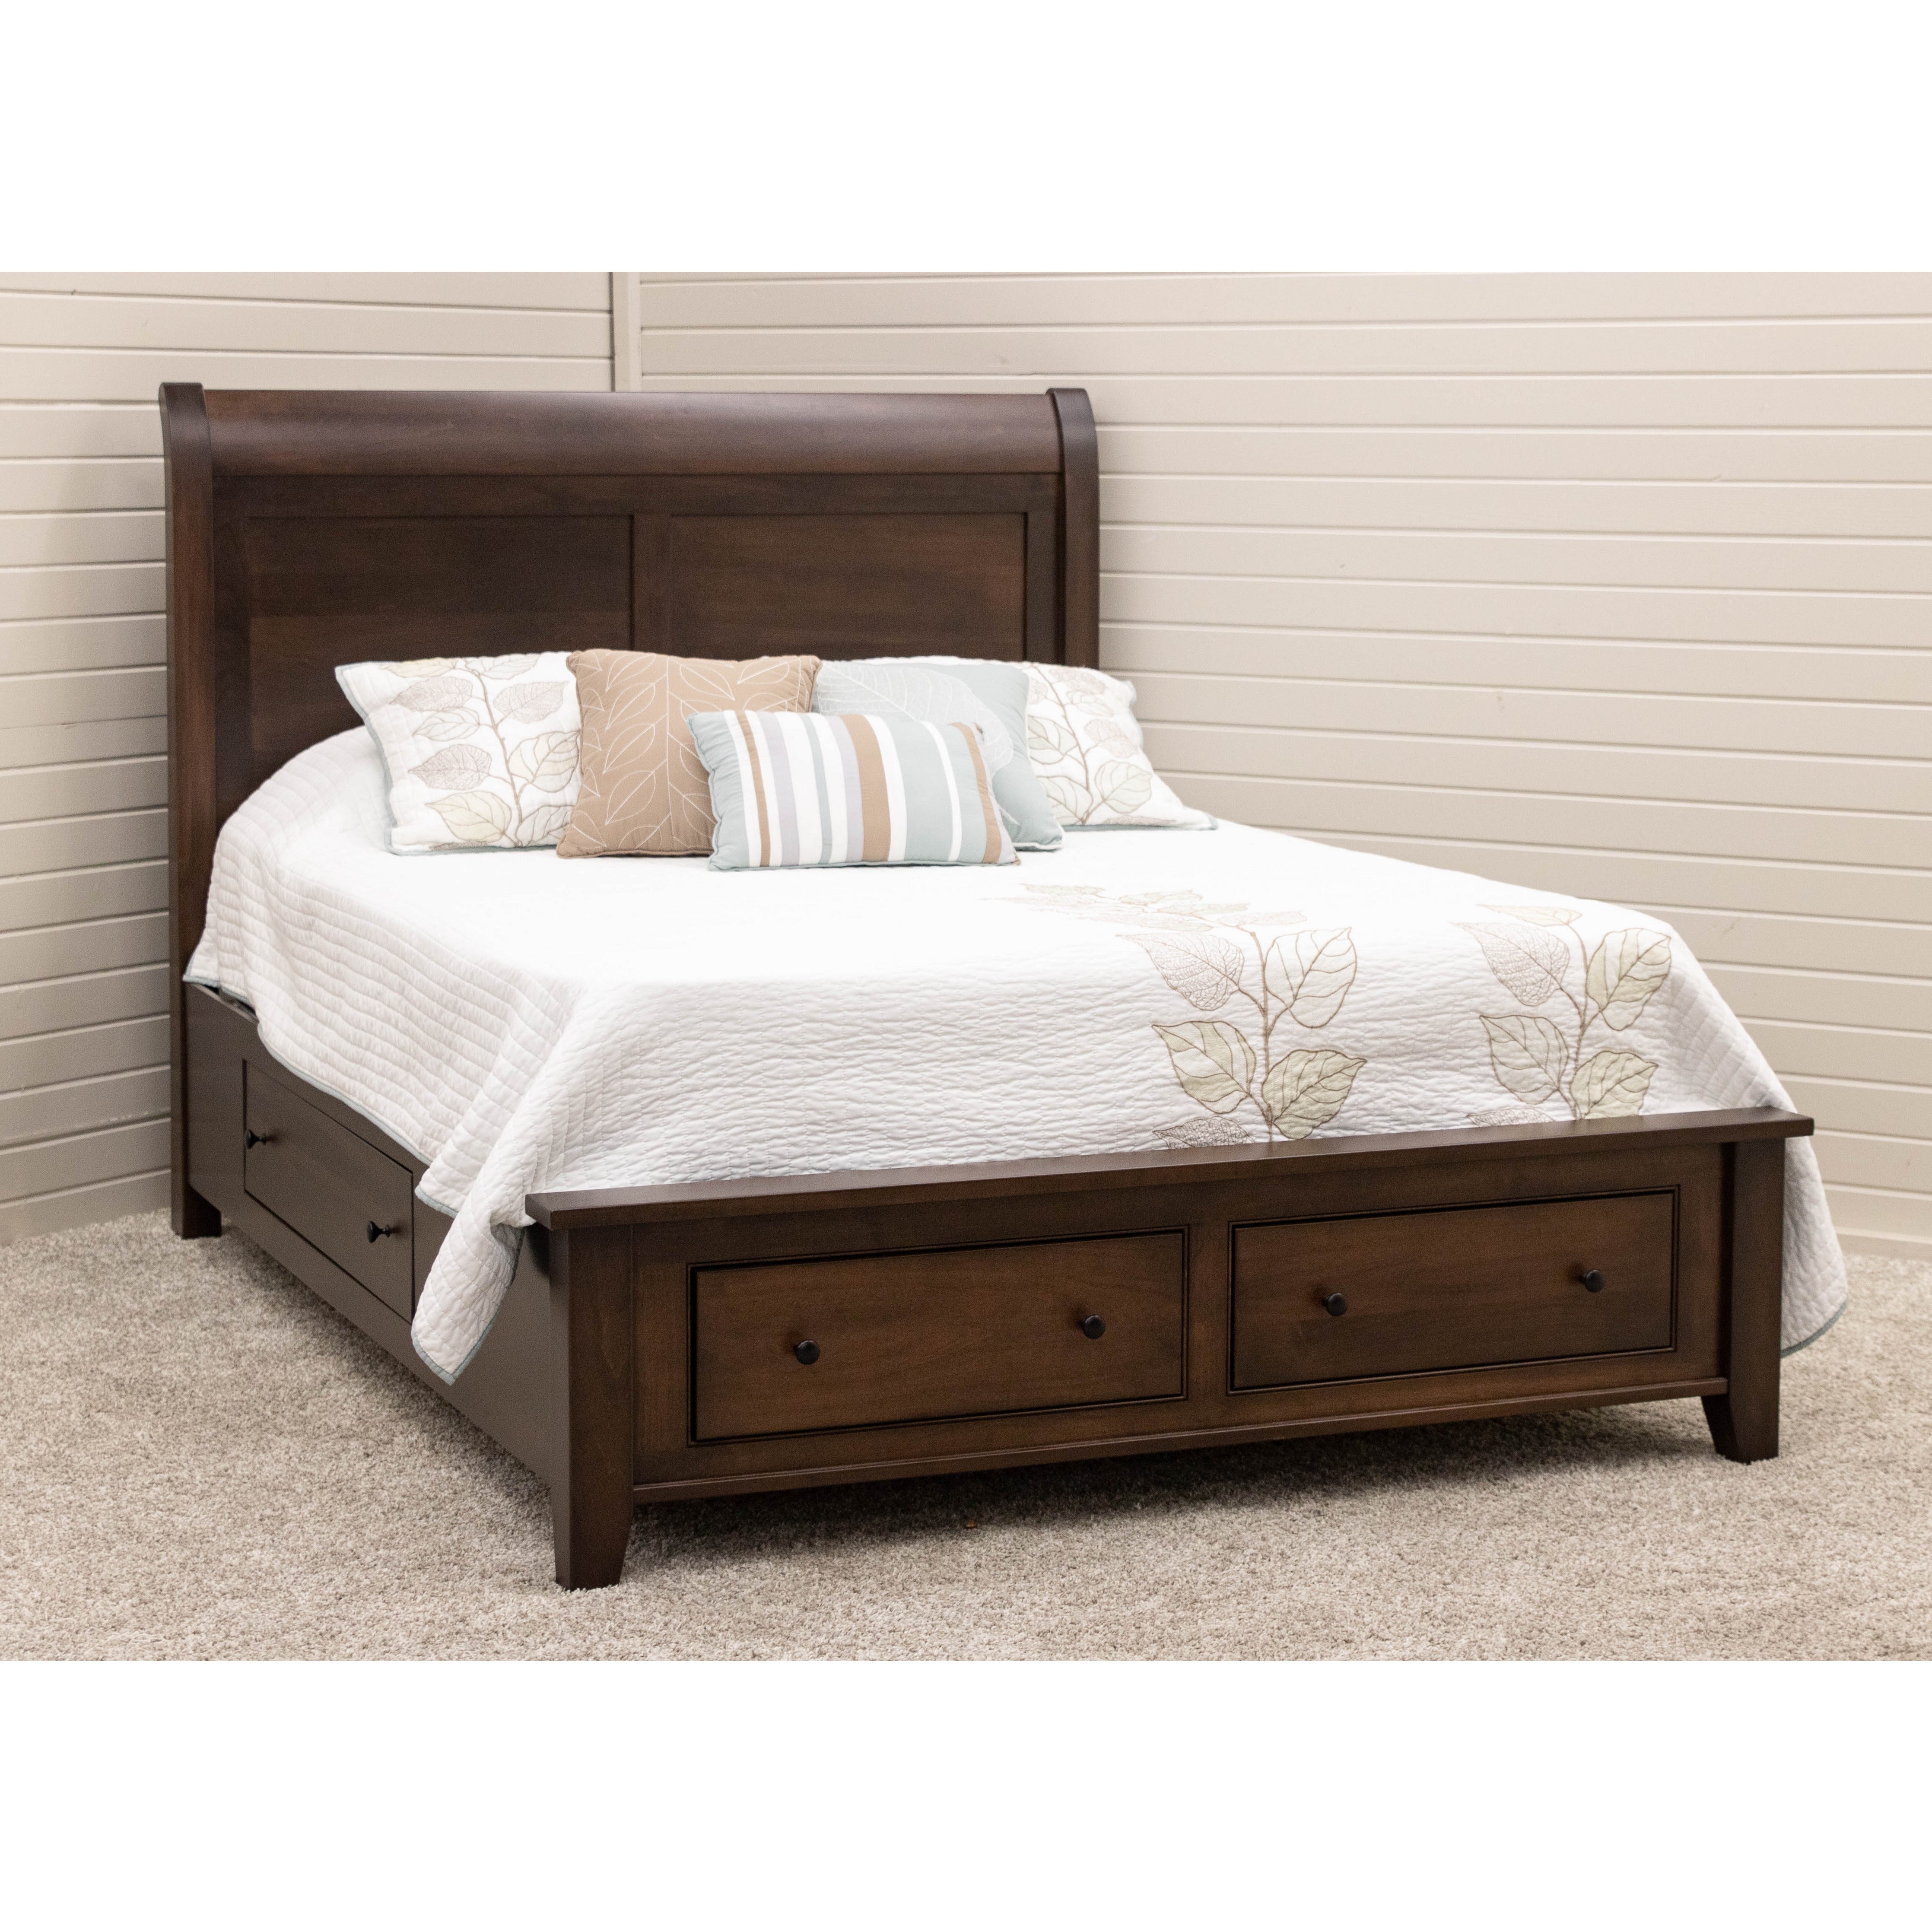 Amish Horizontal Wall Bed Set with Side Storage from DutchCrafters